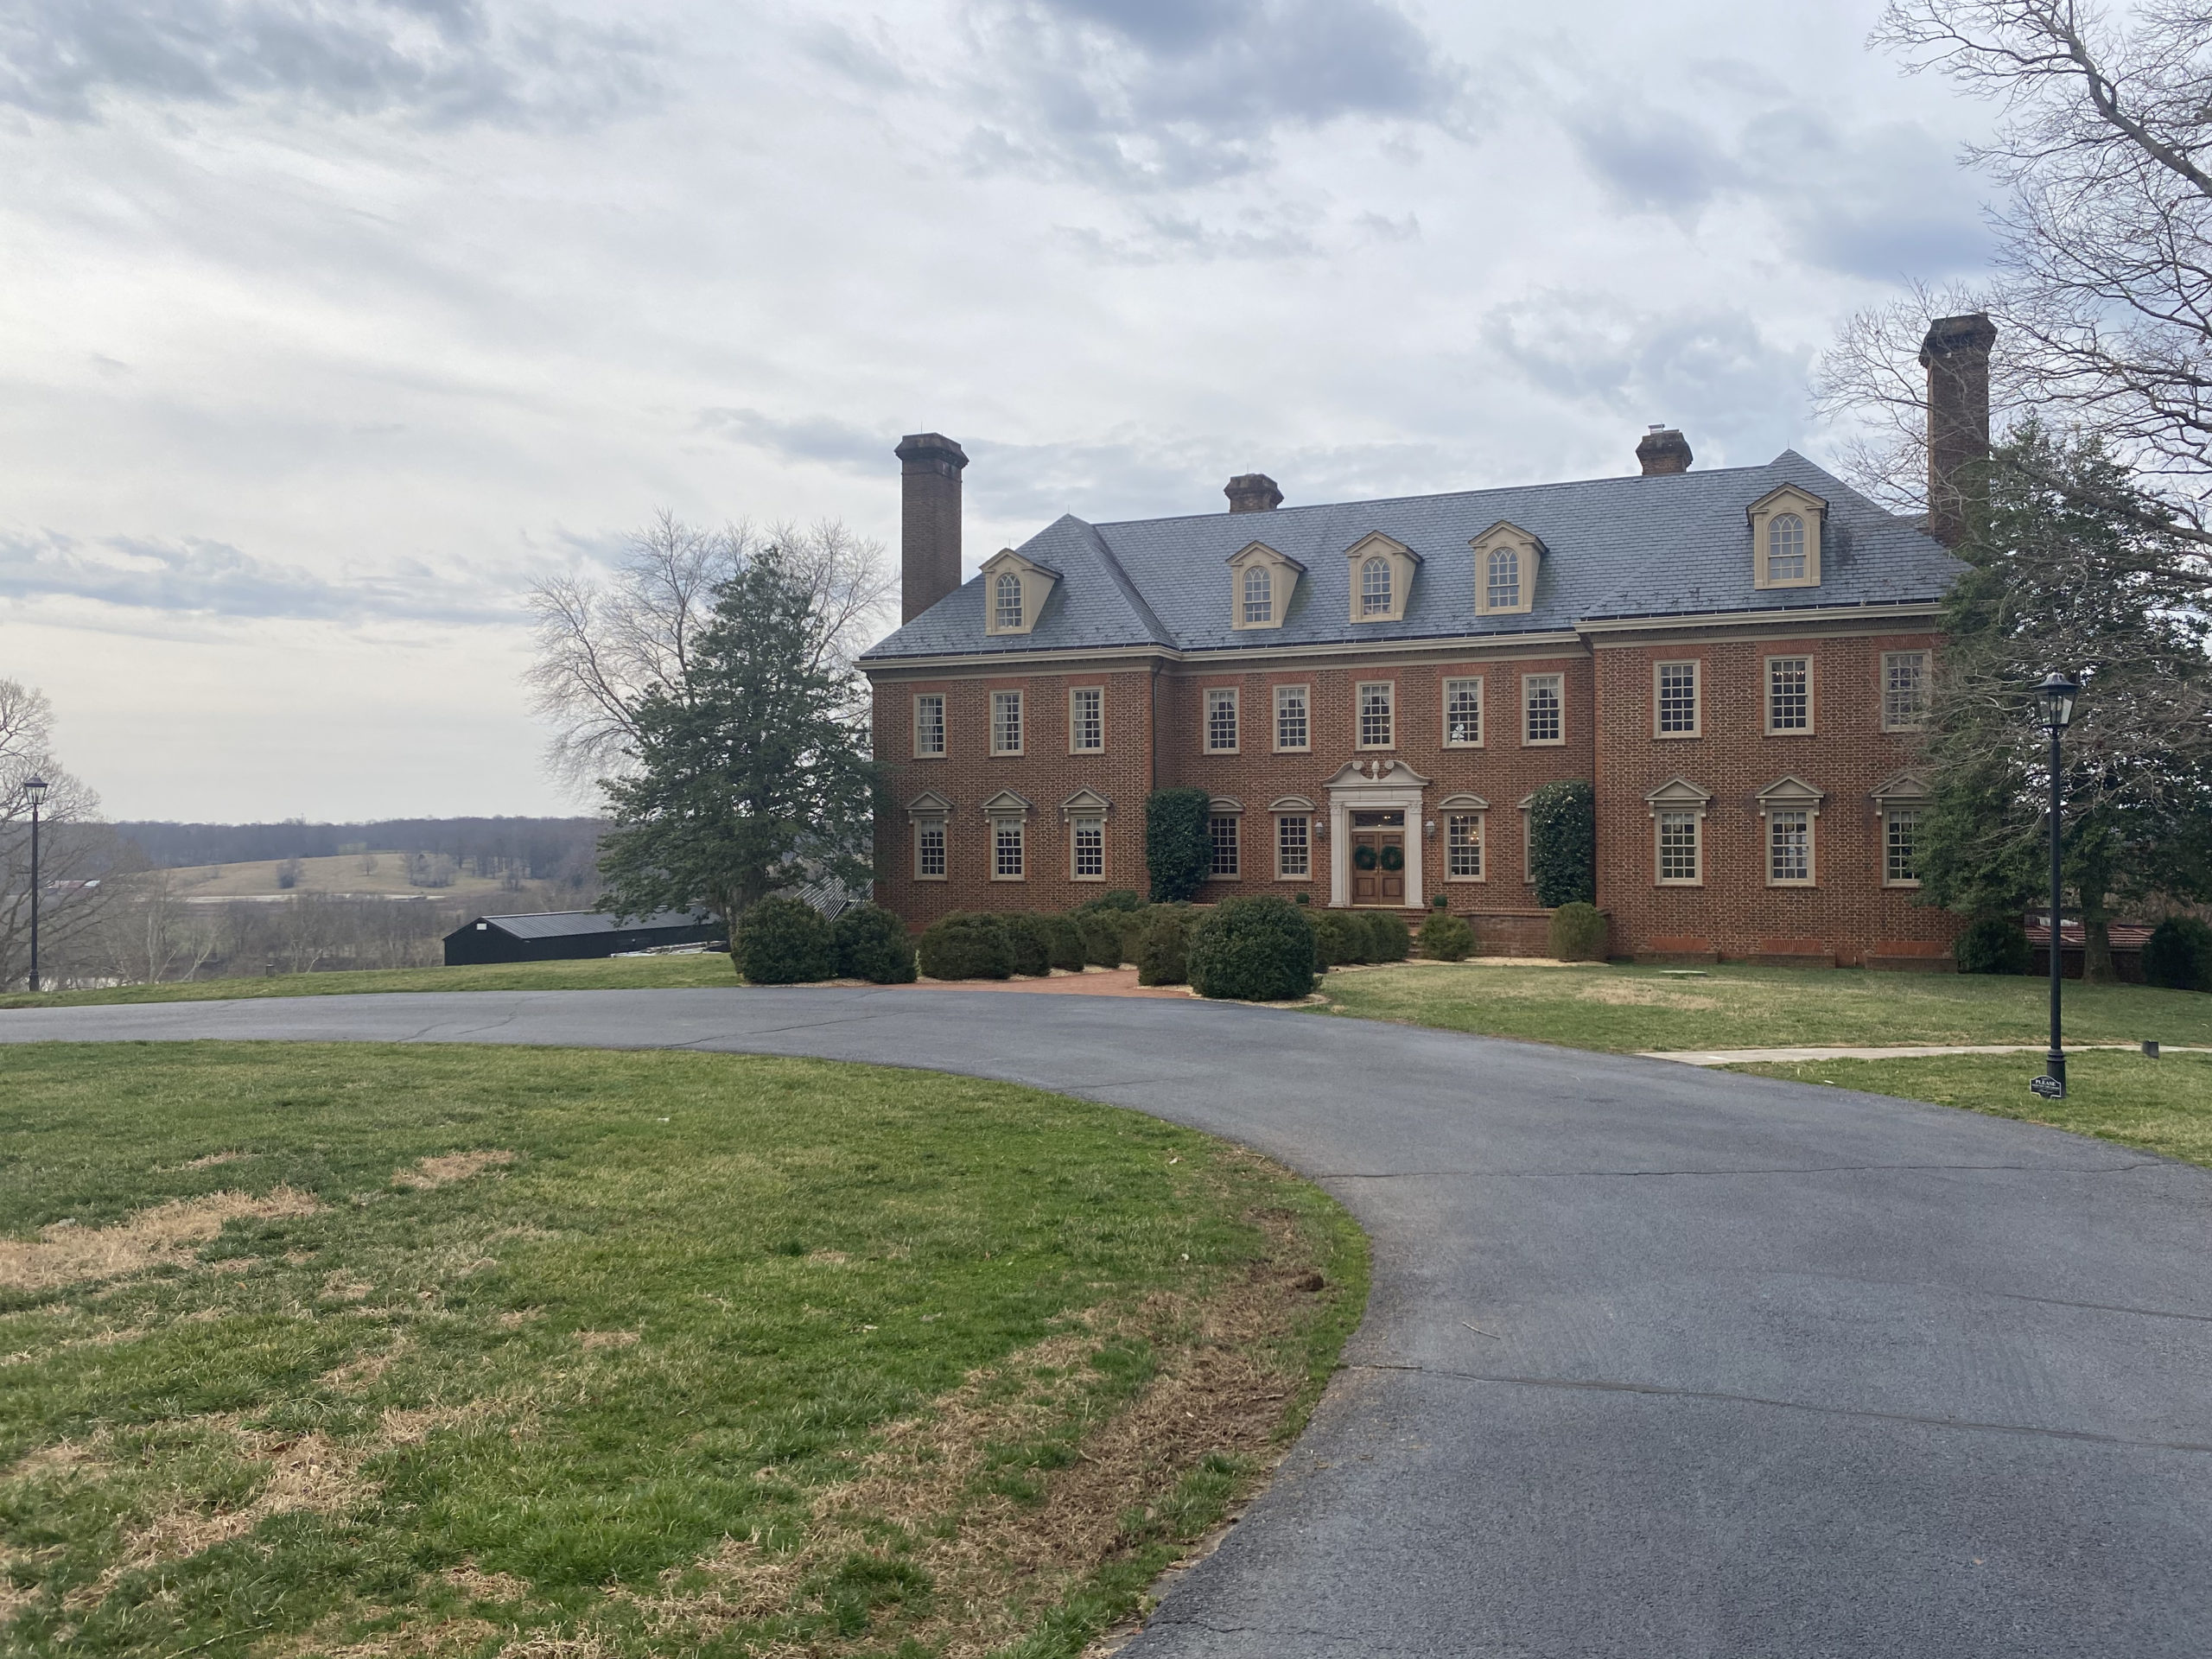 Brick estate surrounded by rolling hills and a circle drive.